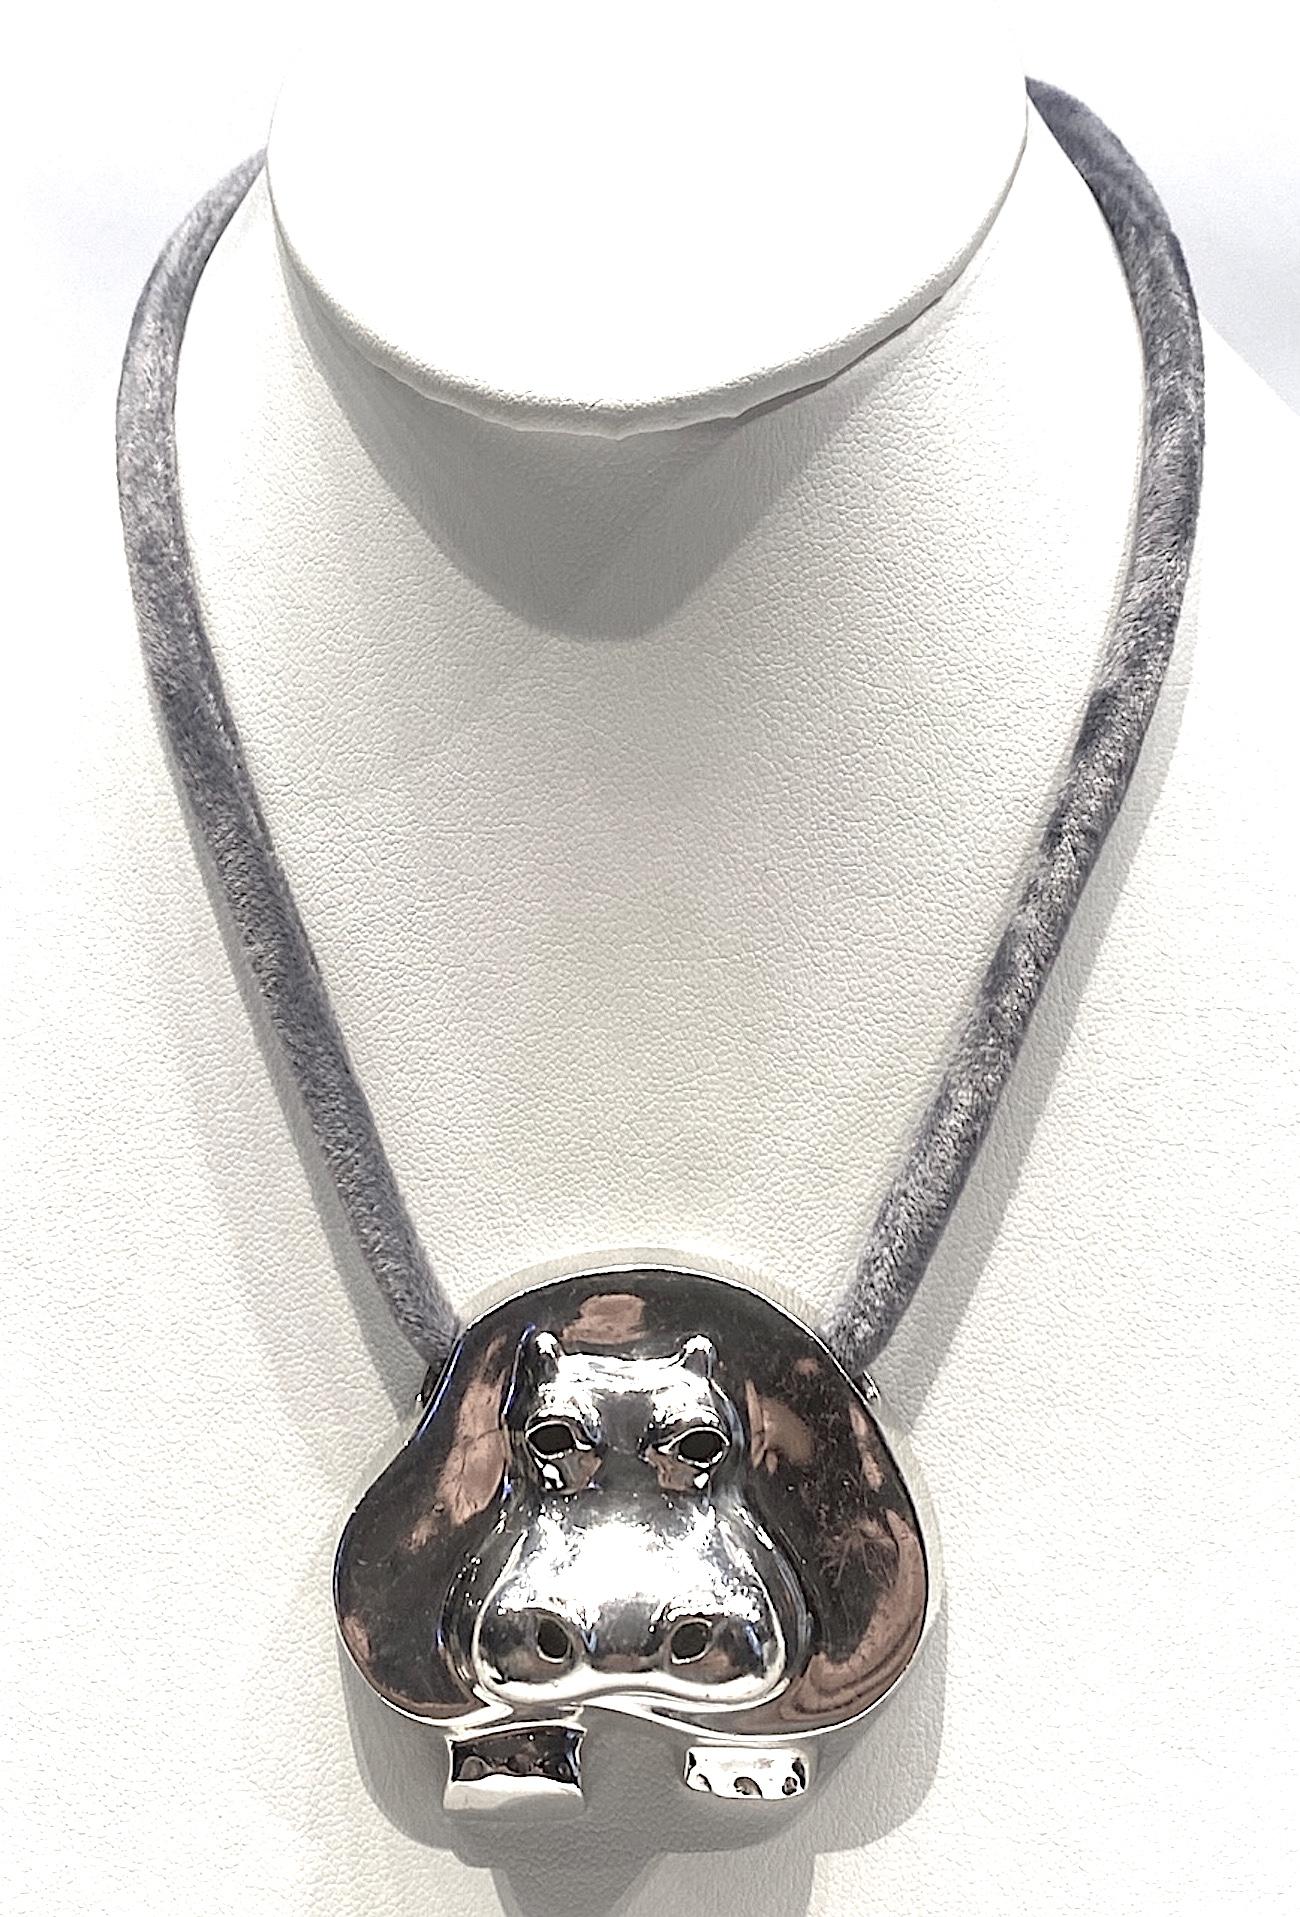 Modernist design sterling silver hippopotamus pendant by New York City jewelry design team Jack Brusca and Joseph Dante in 1975. The pendant is 2.25 inches wide, 2.13 inches high and .75 of an inch deep in cast sterling silver. It is shown on and